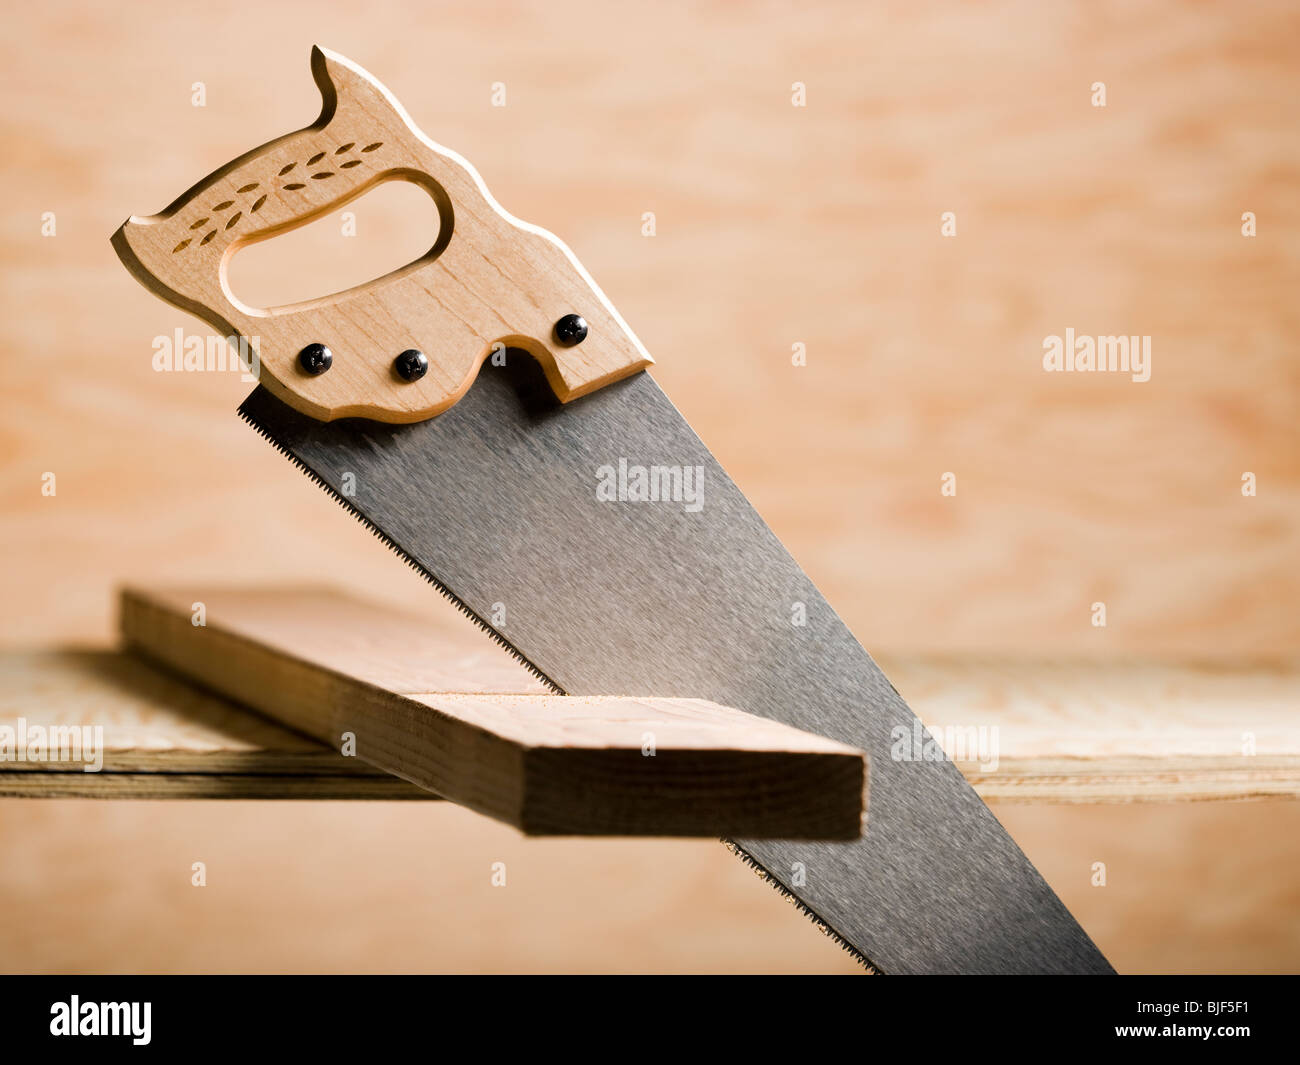 saw in a piece of wood Stock Photo